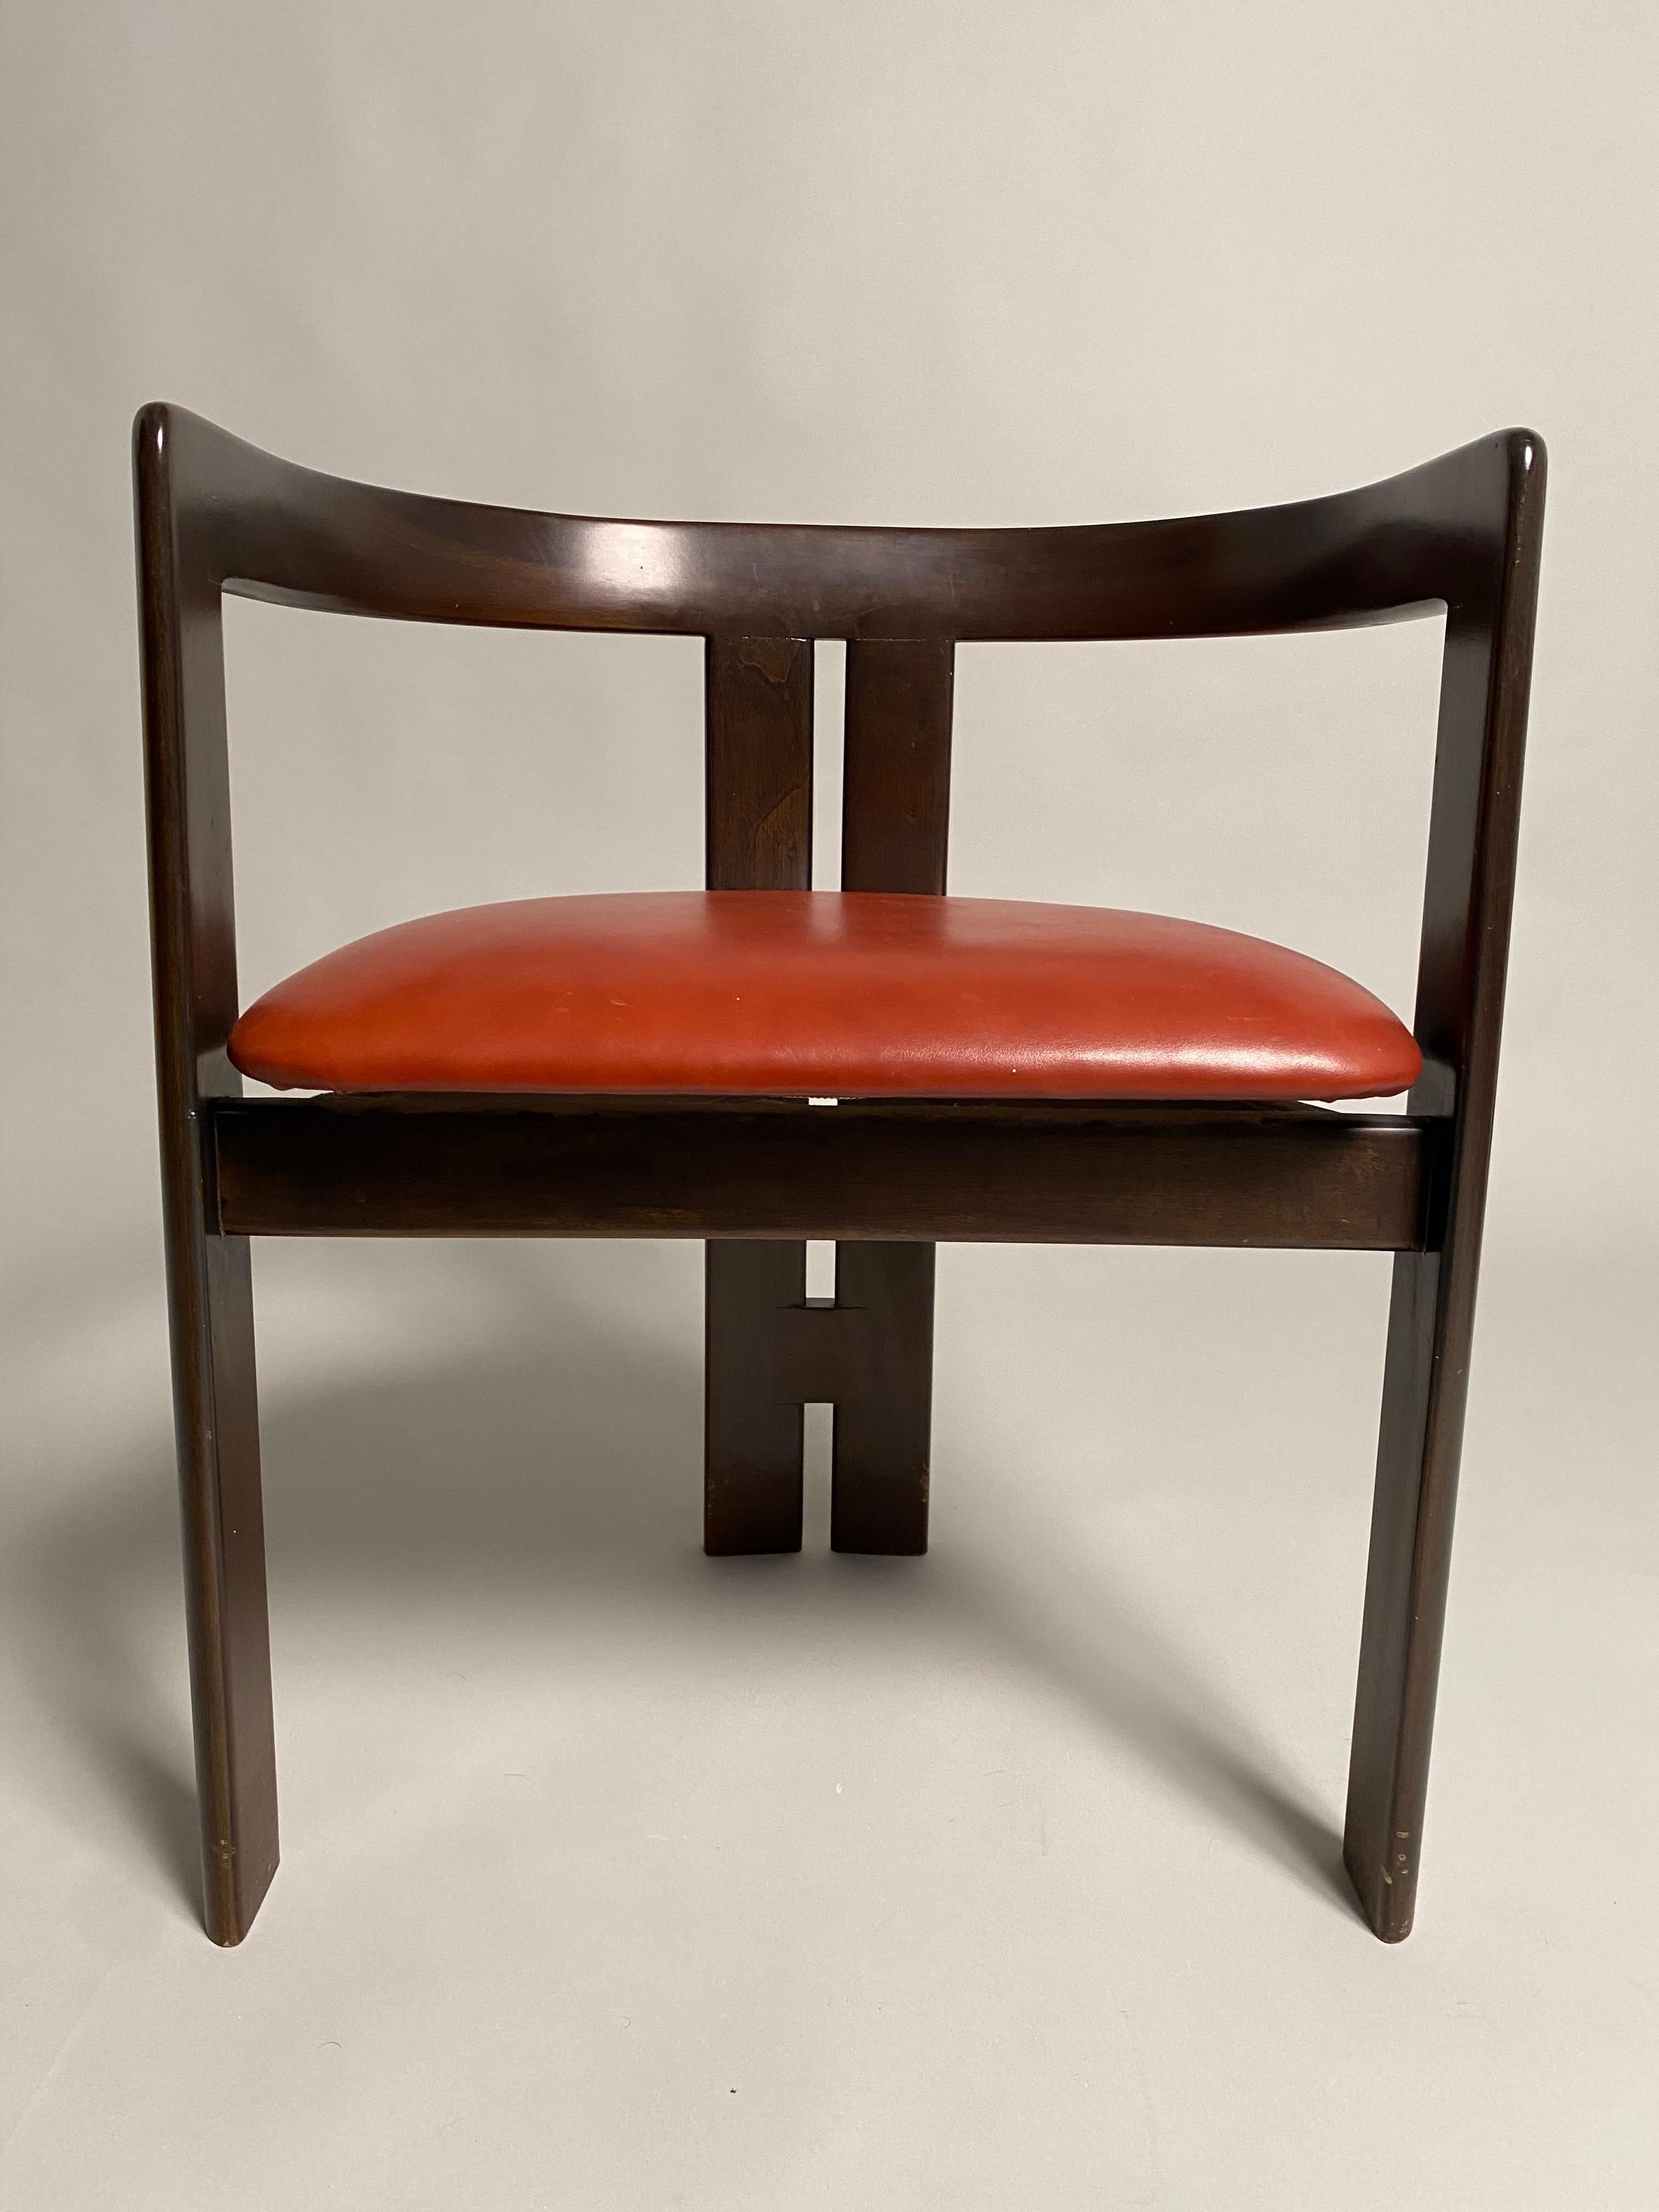 Mid-Century Modern Tobia Scarpa, two Pigreco wooden chairs for Gavina, set of two (1959)